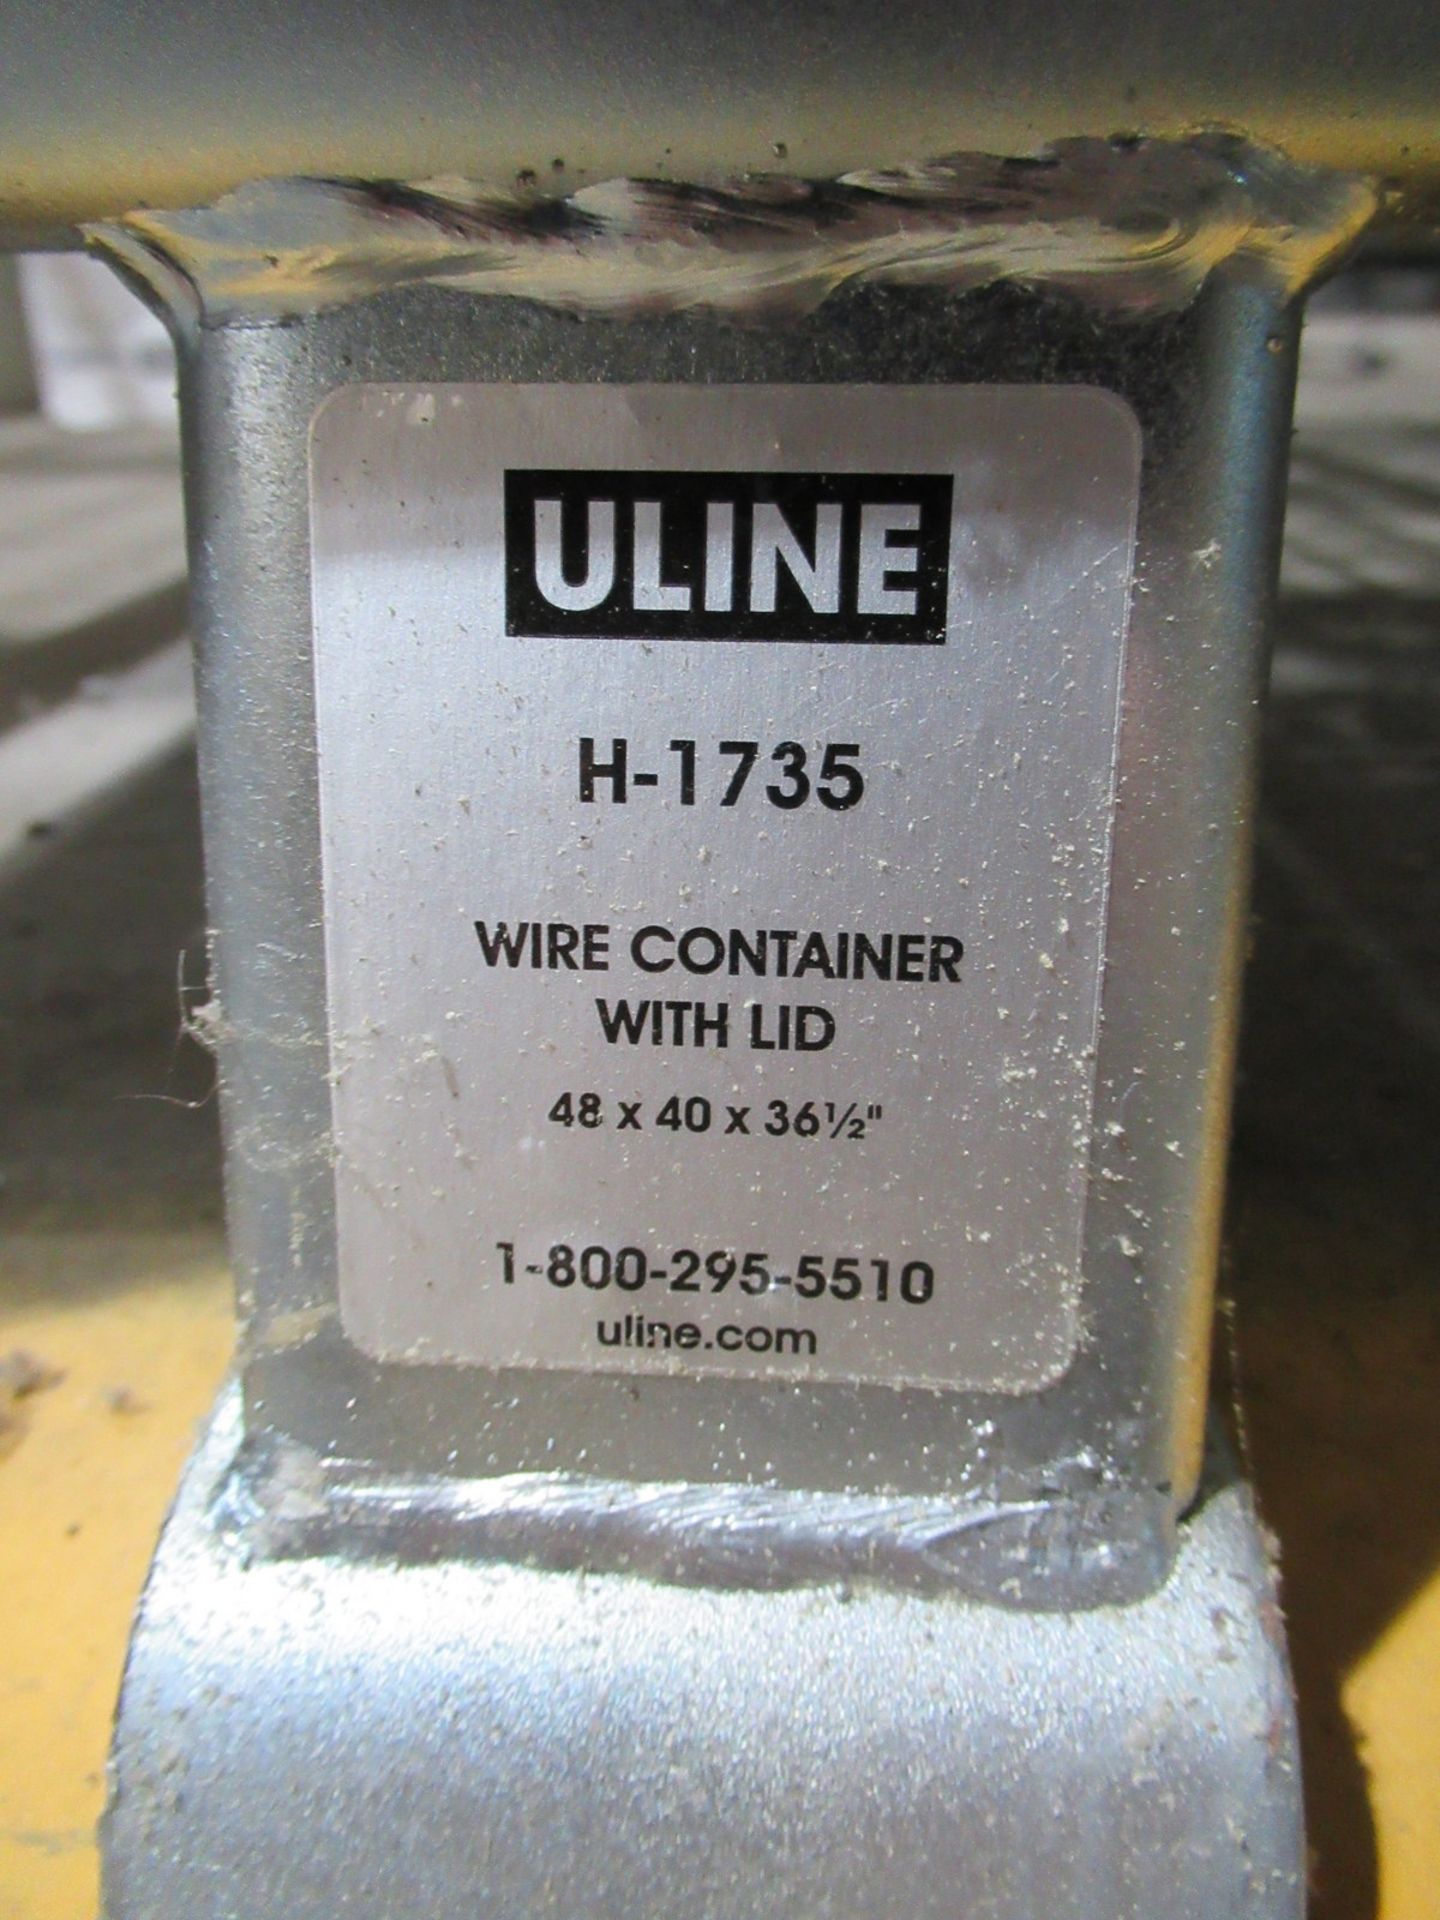 Uline H-1735 Collapsible Wire Container 48" x 40" x 36.5" - Image 3 of 3